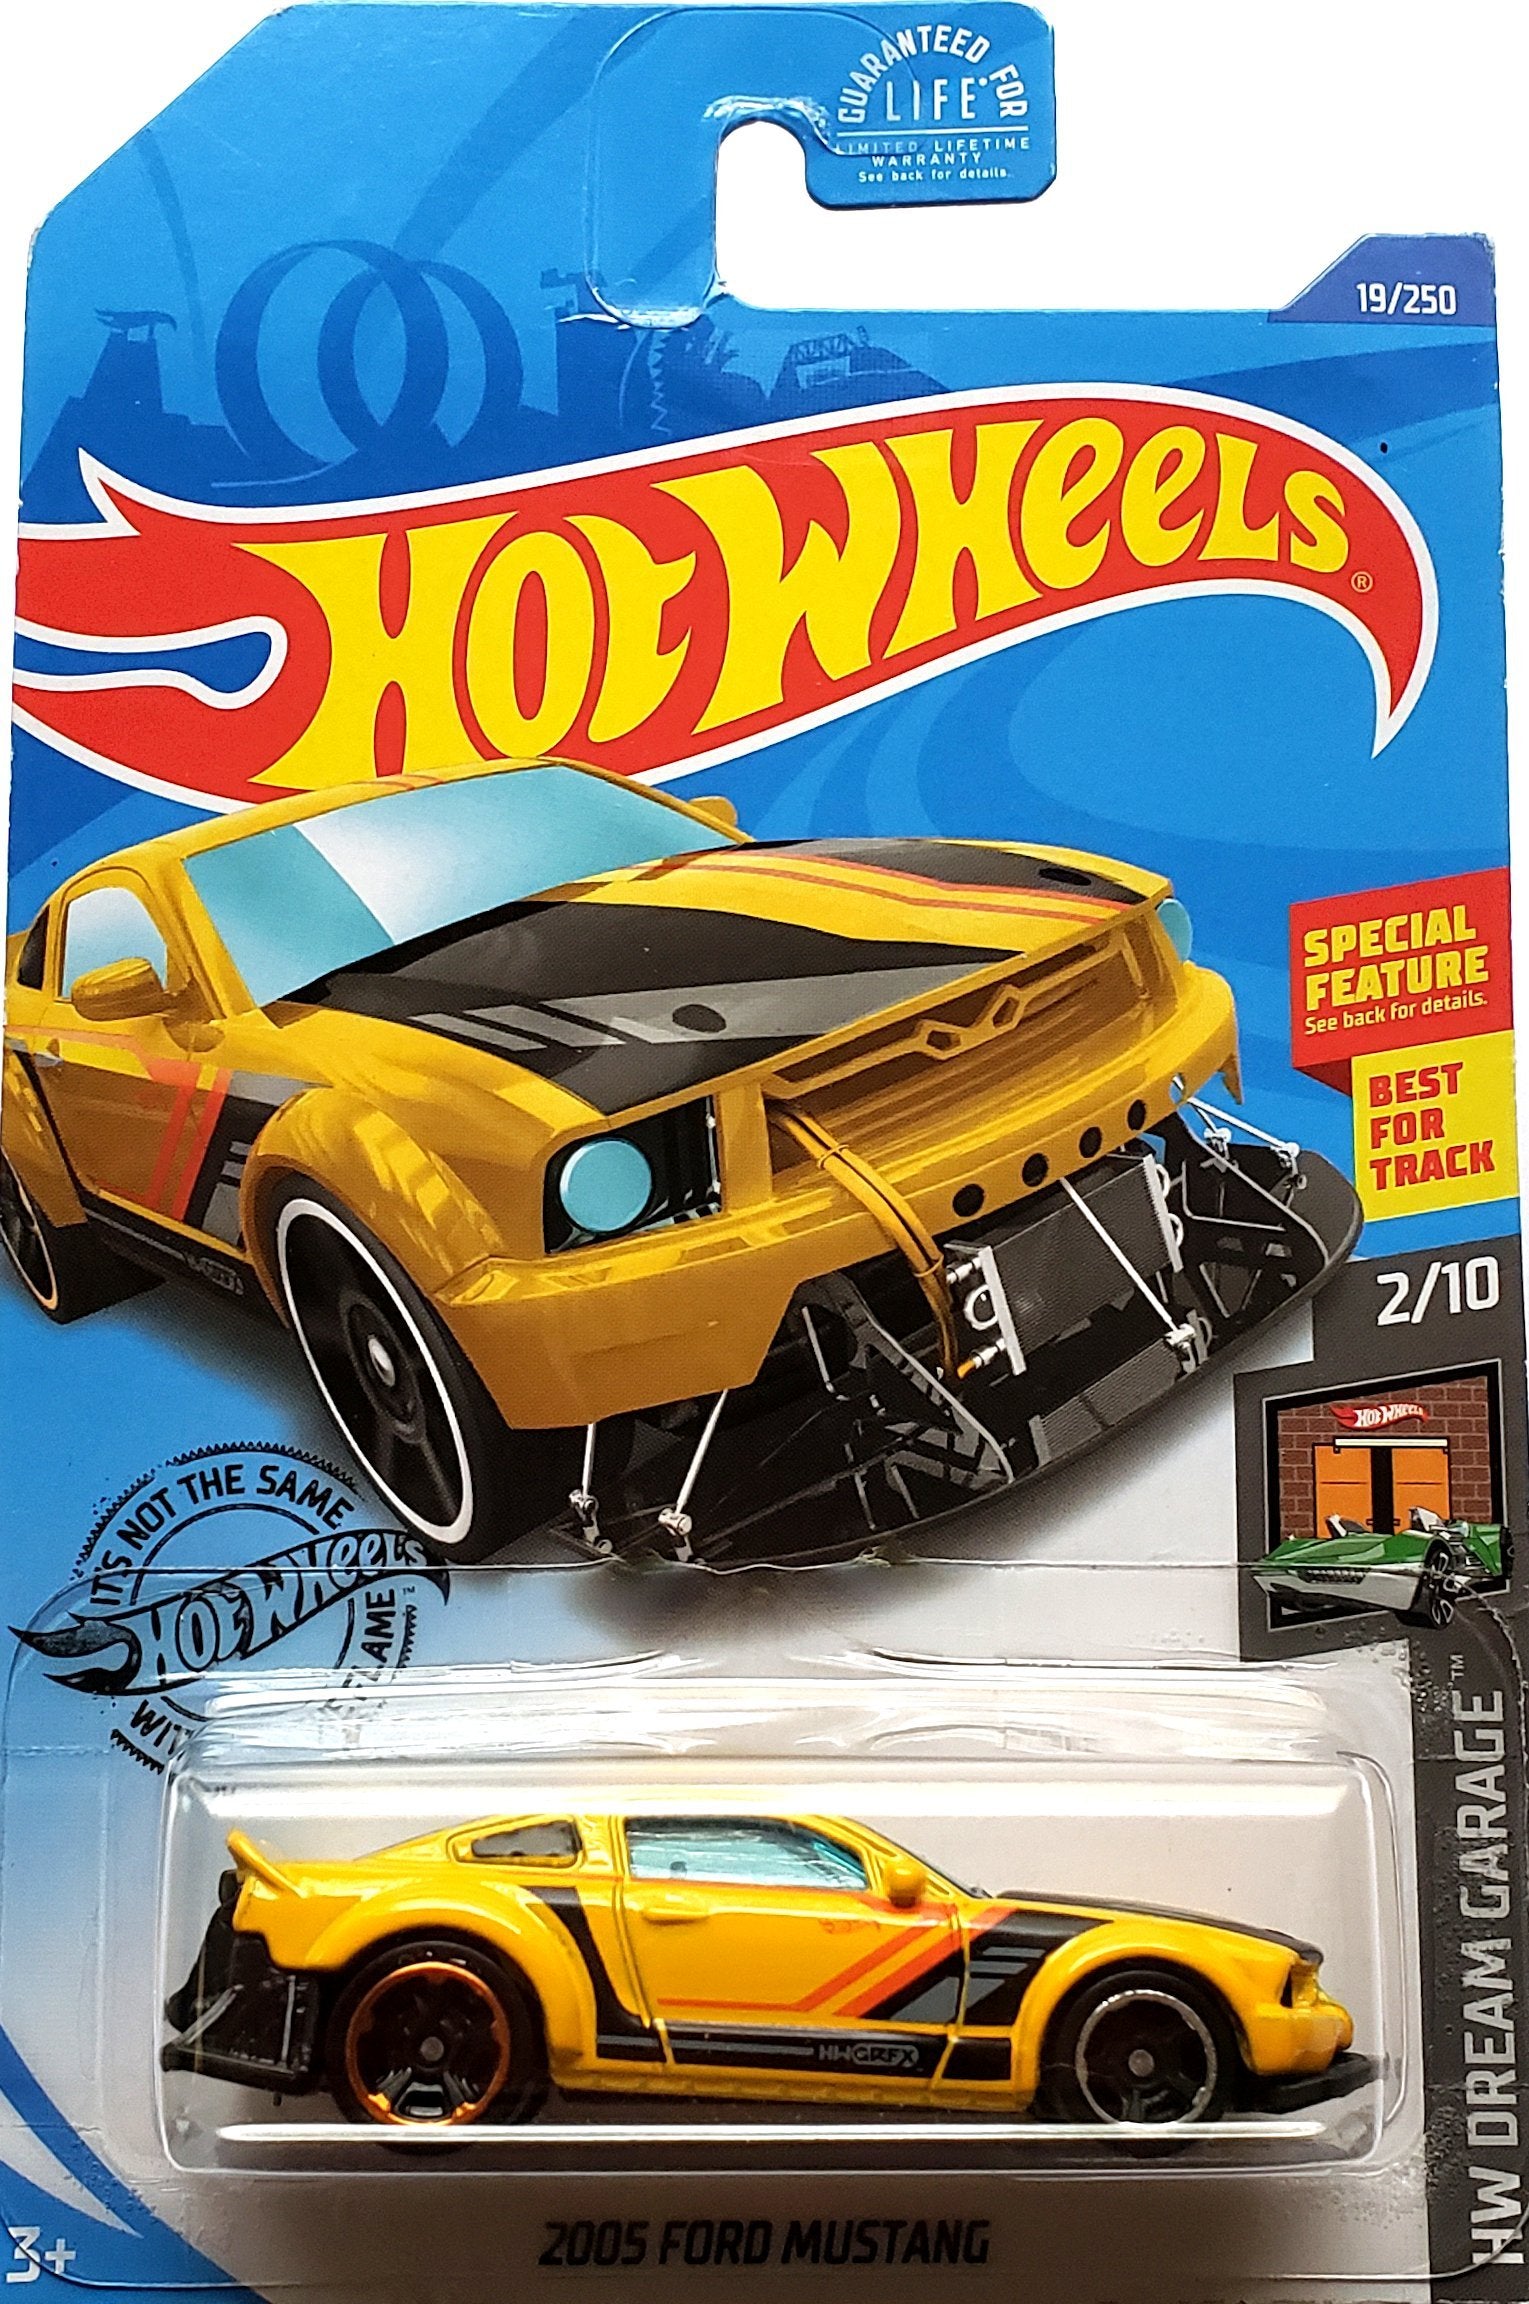 2020 Hot Wheels Mainline #019 - 2005 Ford Mustang (Yellow) GHC22